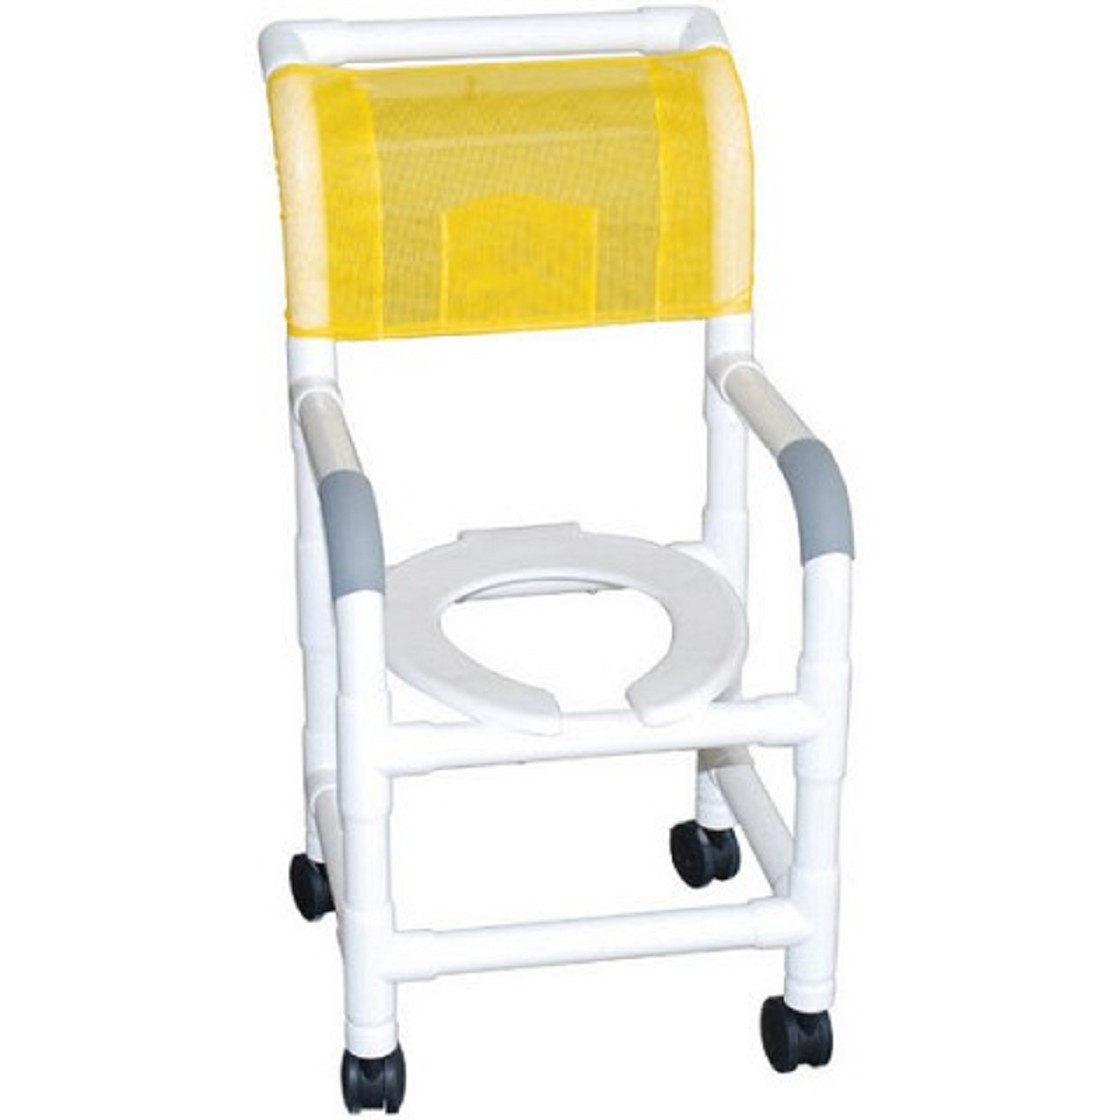 Small Bathroom Chair
 Pediatric or Small Adult Shower Chair FREE Shipping